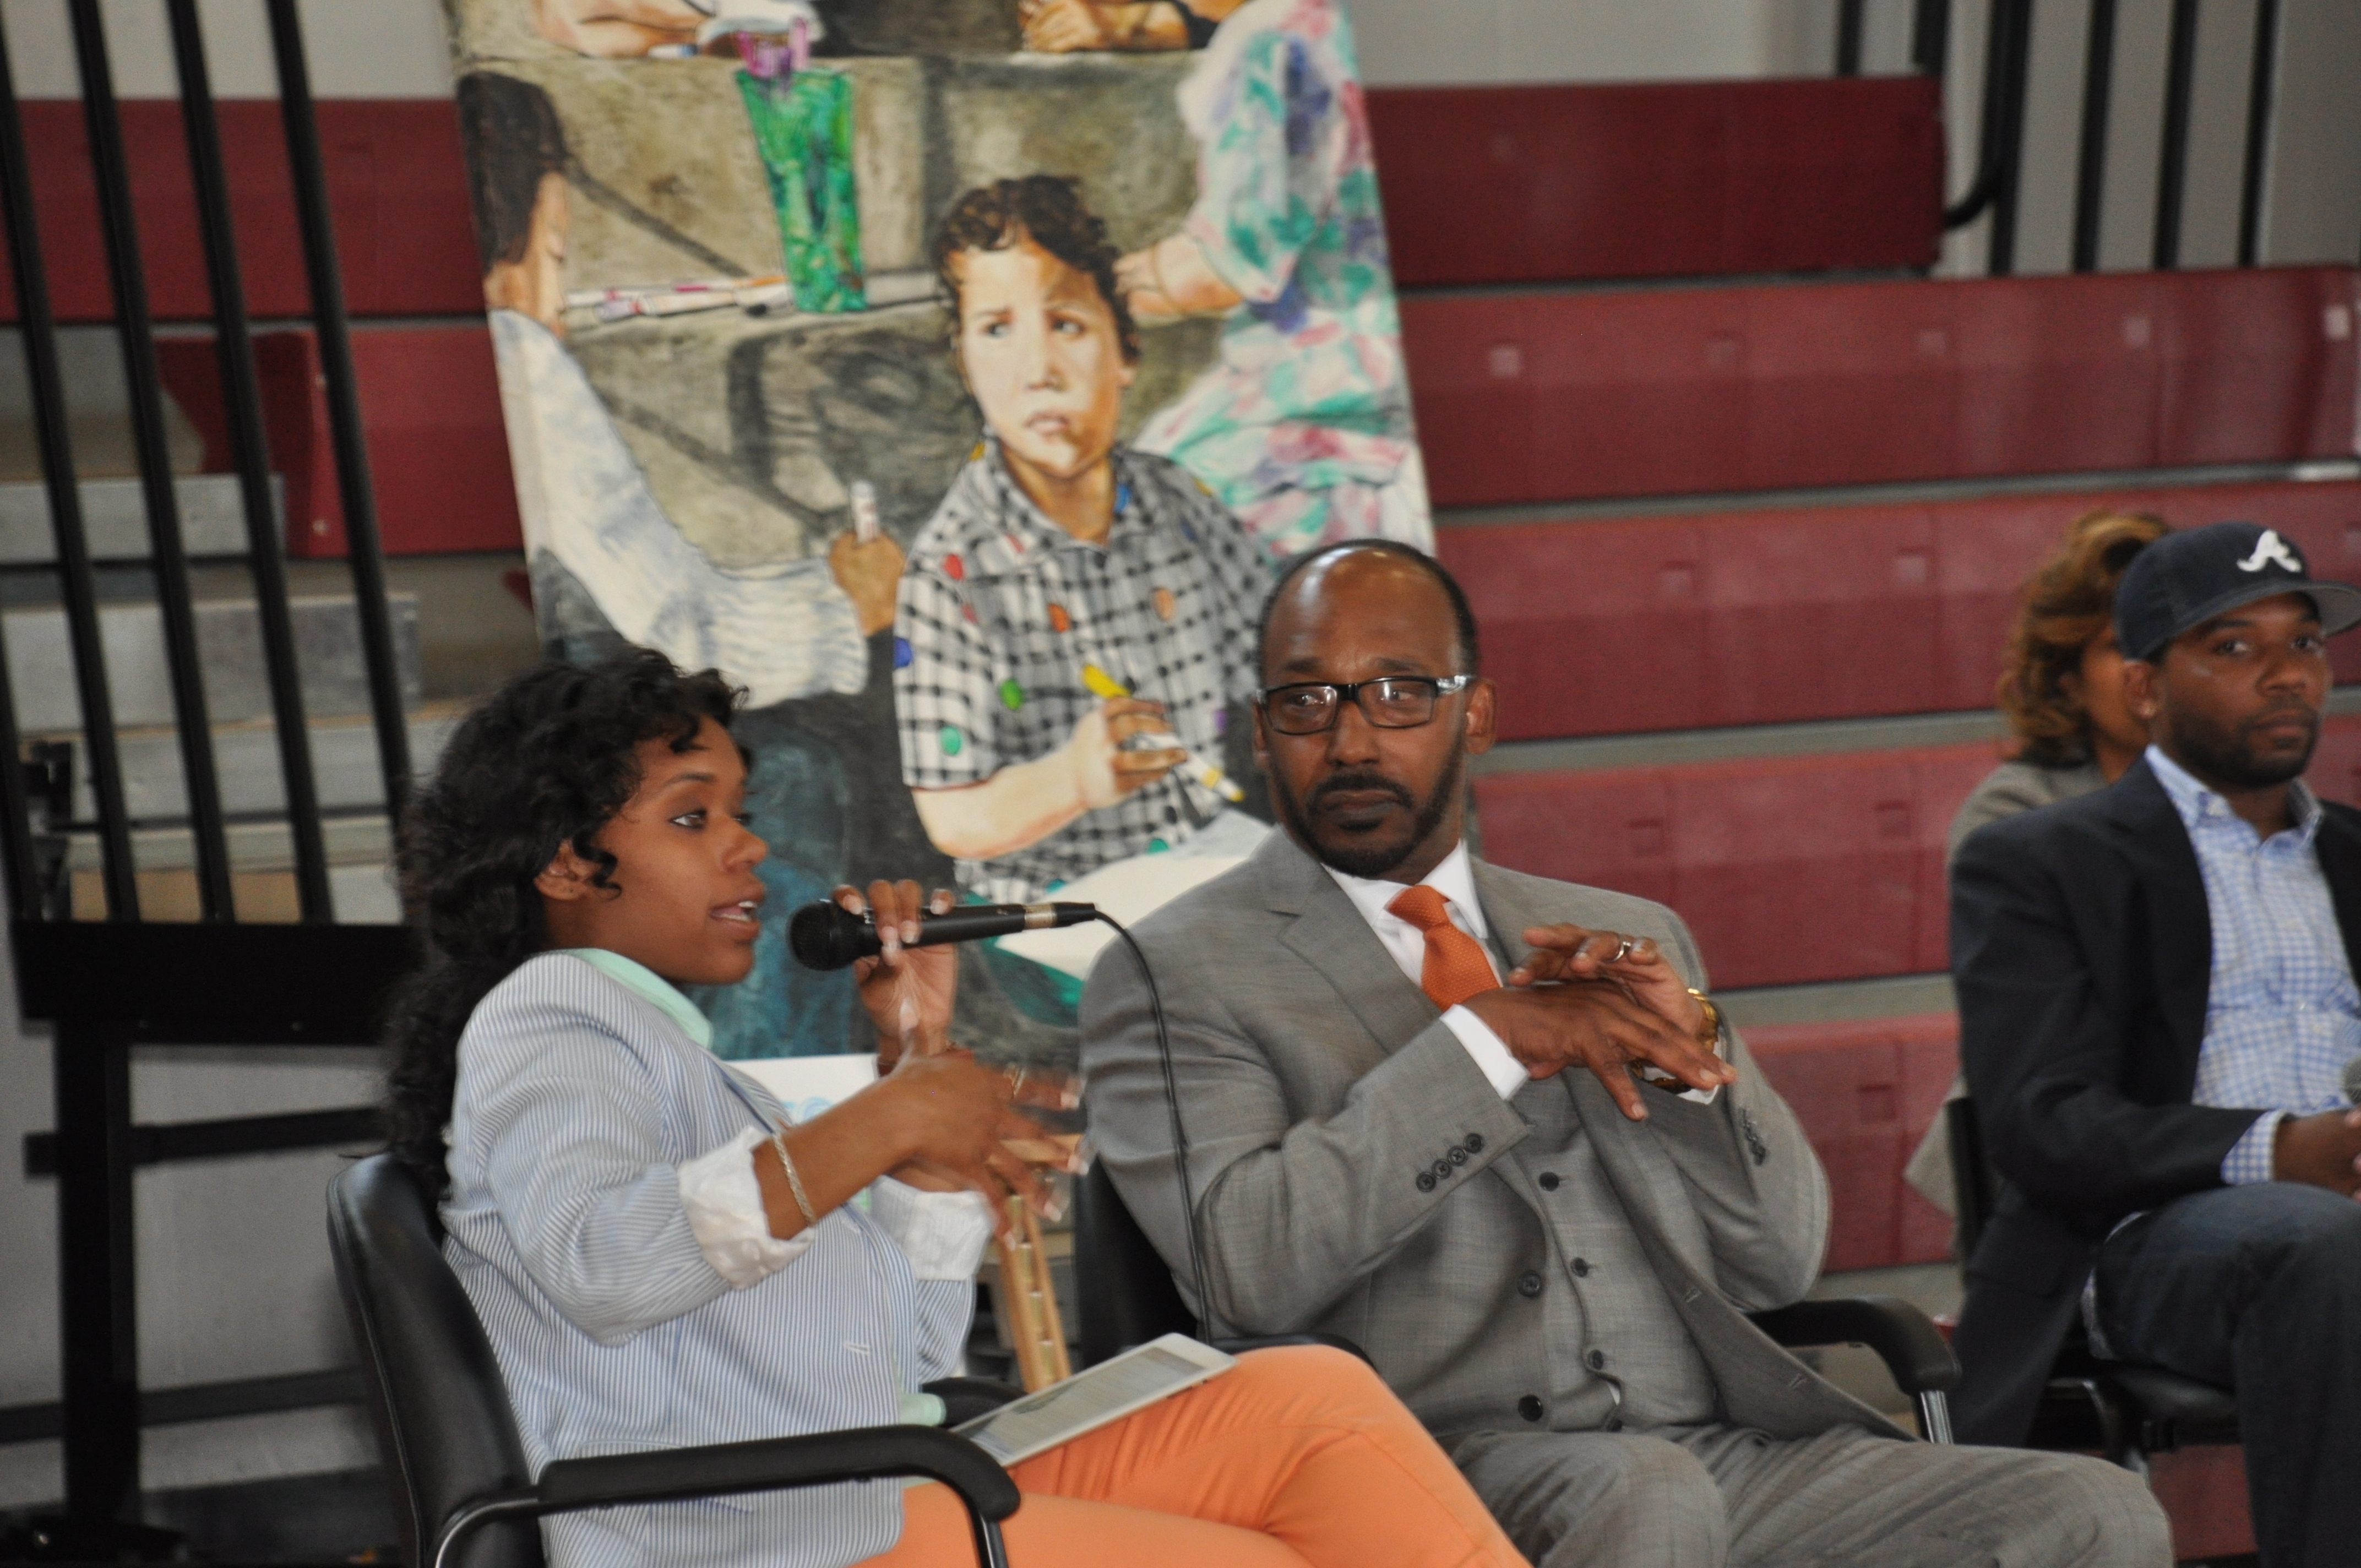 Syreeta Martin, journalist and consultant (seated, left), recently hosted Chester Community Charter School’s (CCCS) First Annual Teen Summit for Students event, where more than 300 seventh- and eighth